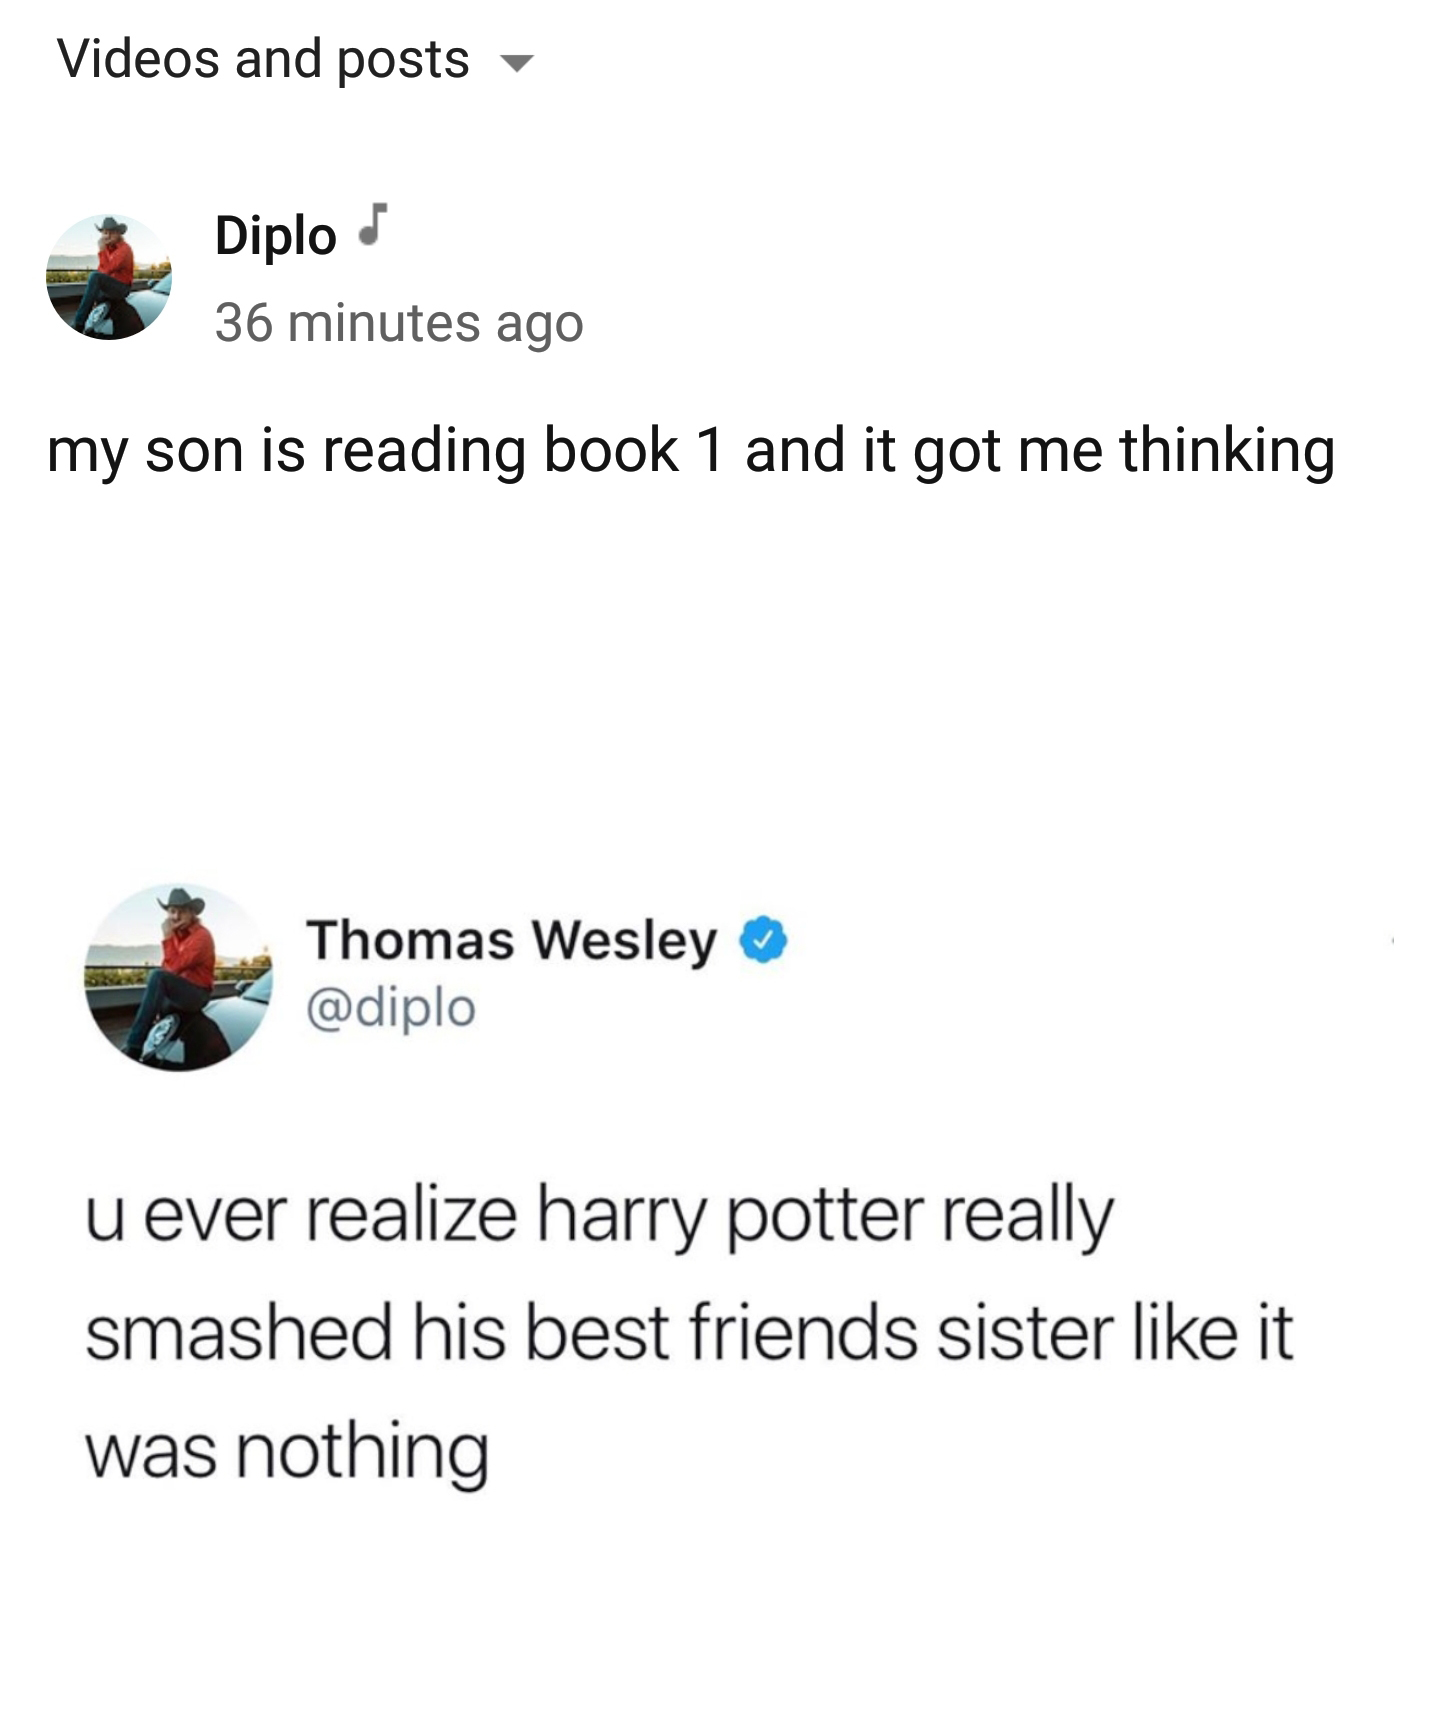 angle - Videos and posts Diplo s 36 minutes ago my son is reading book 1 and it got me thinking Thomas Wesley u ever realize harry potter really smashed his best friends sister it was nothing